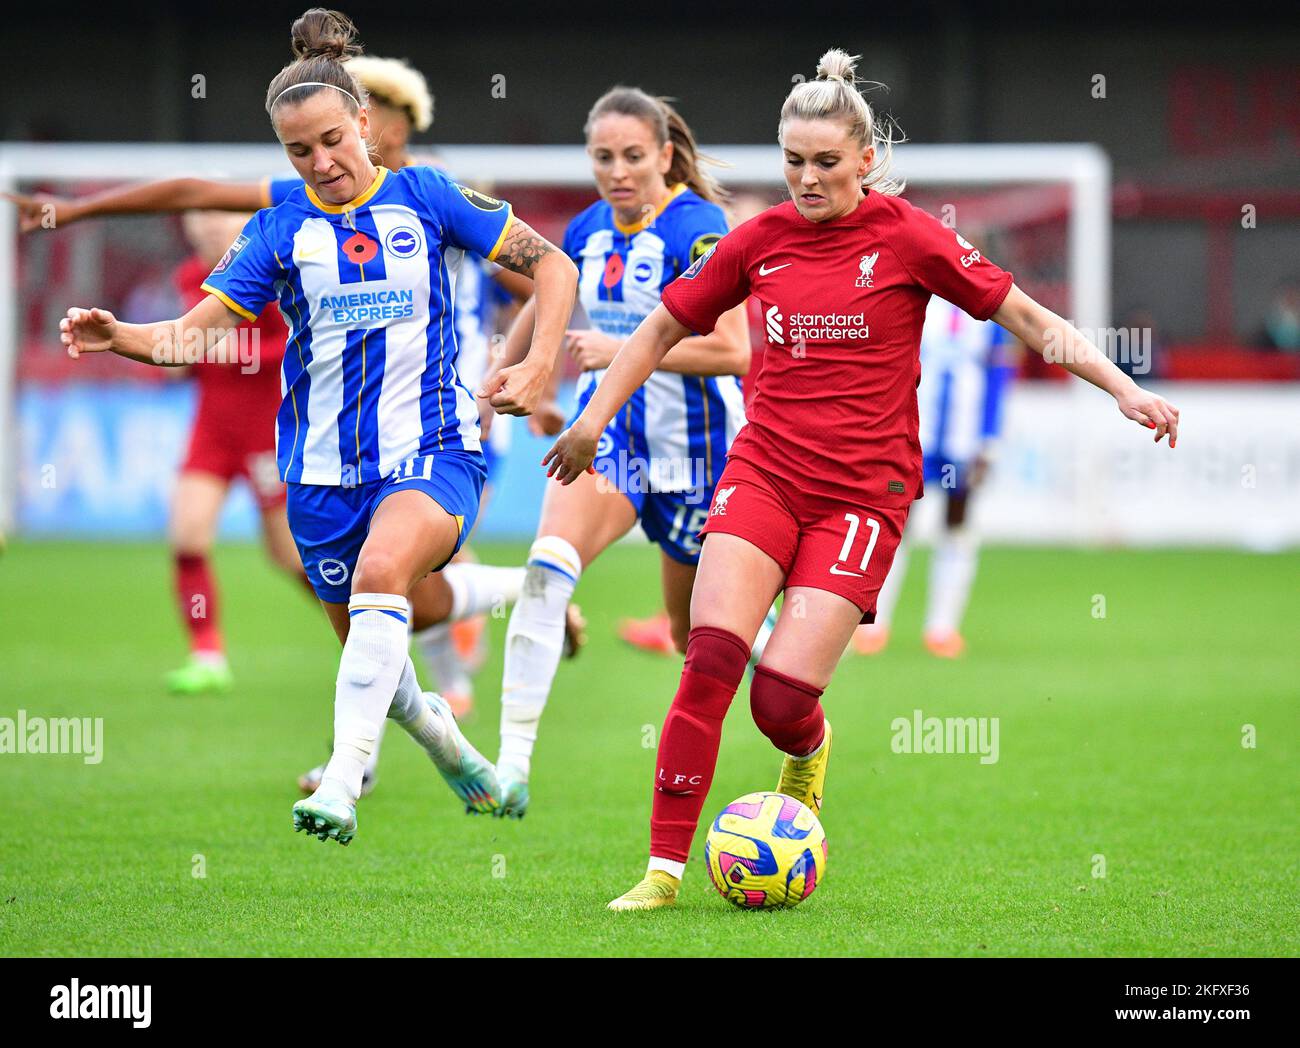 Crawley, UK. 20th Nov, 2022. Julia Zigiotti Olme of Brighton and Hove Albion and Melissa Lawley of Liverpool during the FA Women's Super League match between Brighton & Hove Albion Women and Liverpool Women at The People's Pension Stadium on November 20th 2022 in Crawley, United Kingdom. (Photo by Jeff Mood/phcimages.com) Credit: PHC Images/Alamy Live News Stock Photo